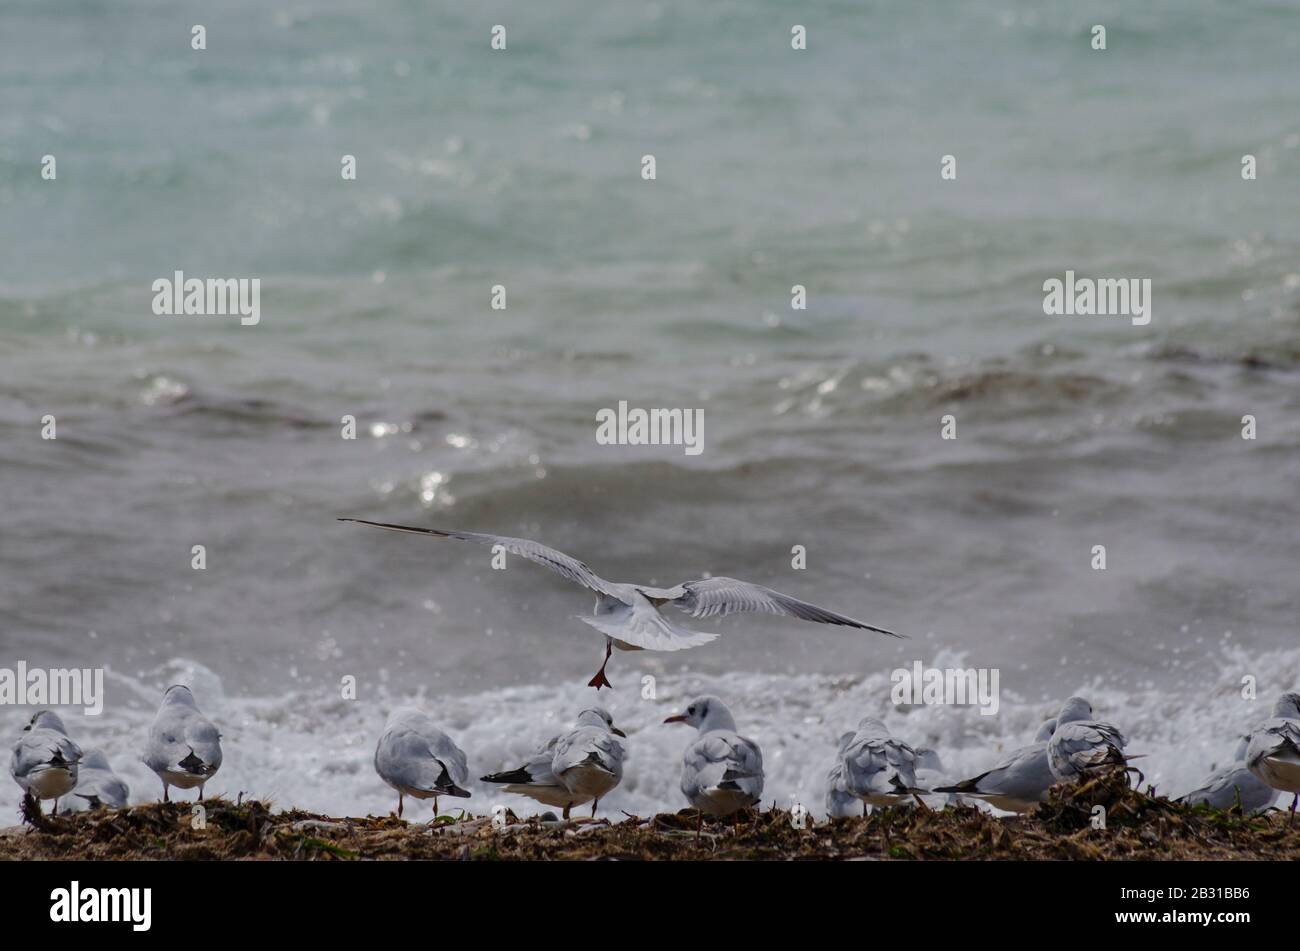 A flock of Mediterranean gulls ( Larus melanocephalus ) take to the air on a beach near Glyfada Athens Greece. The gulls are just beginning to loose t Stock Photo